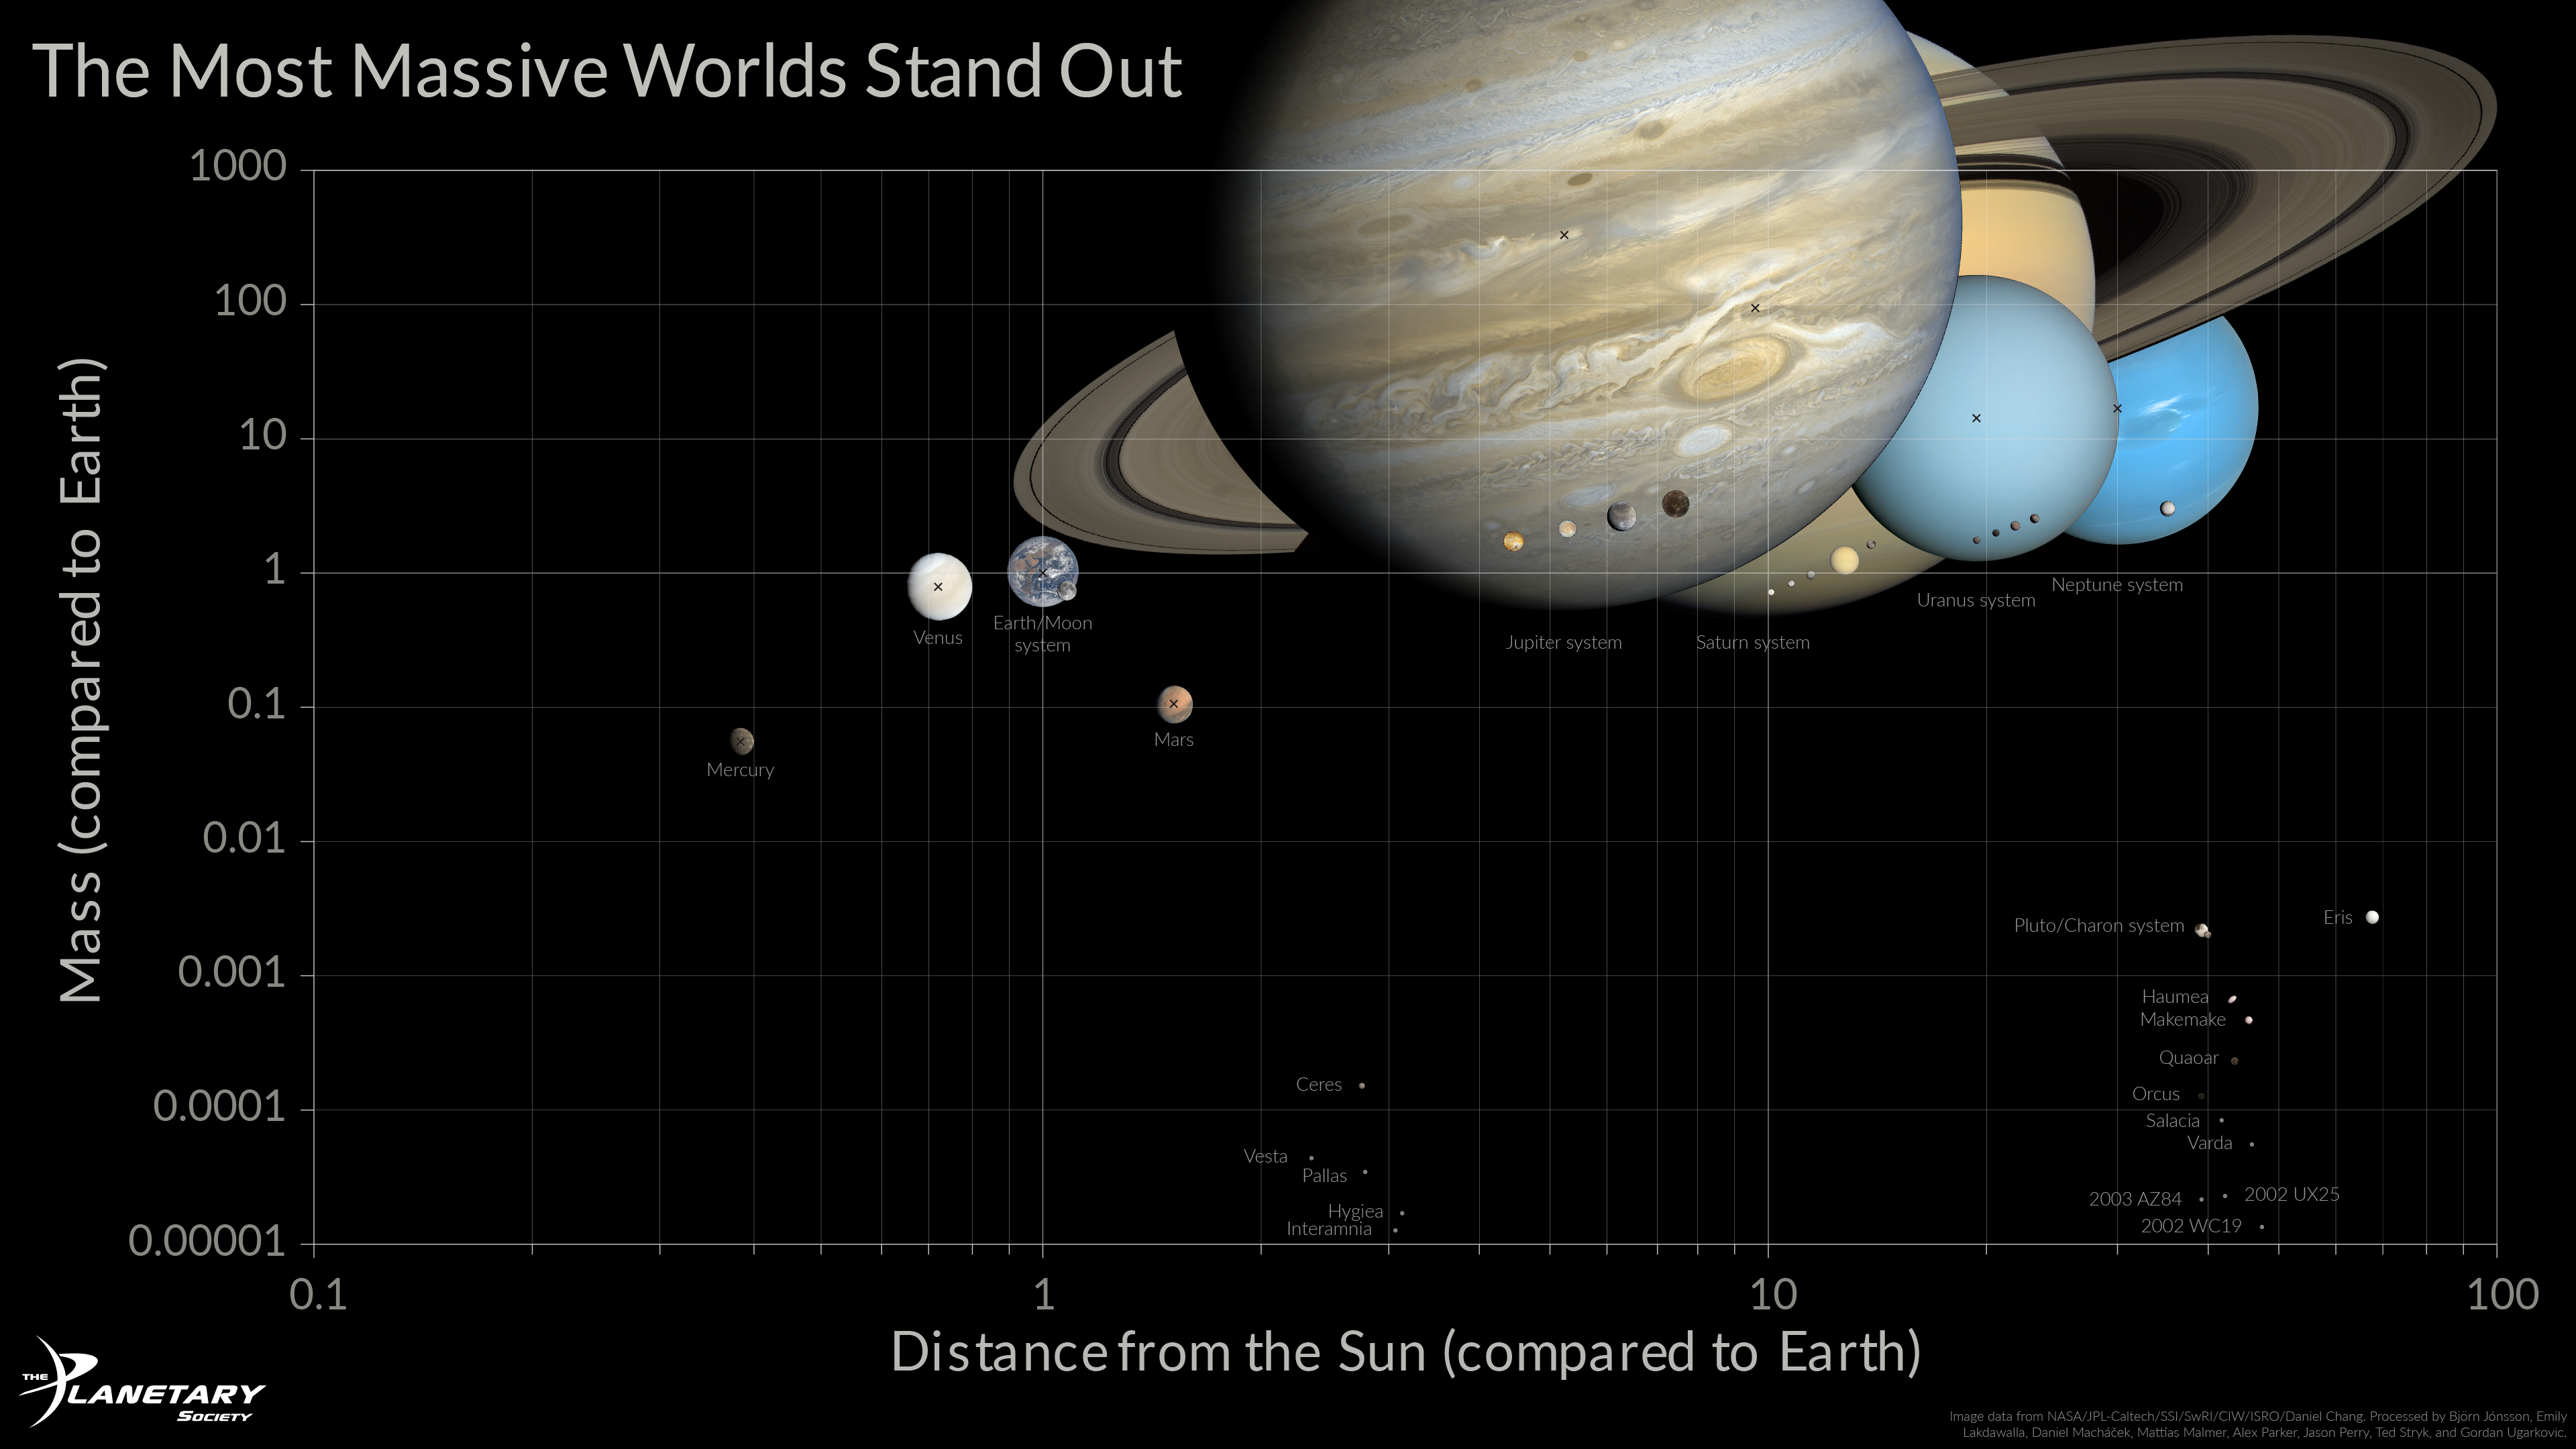 mass of planets in solar system